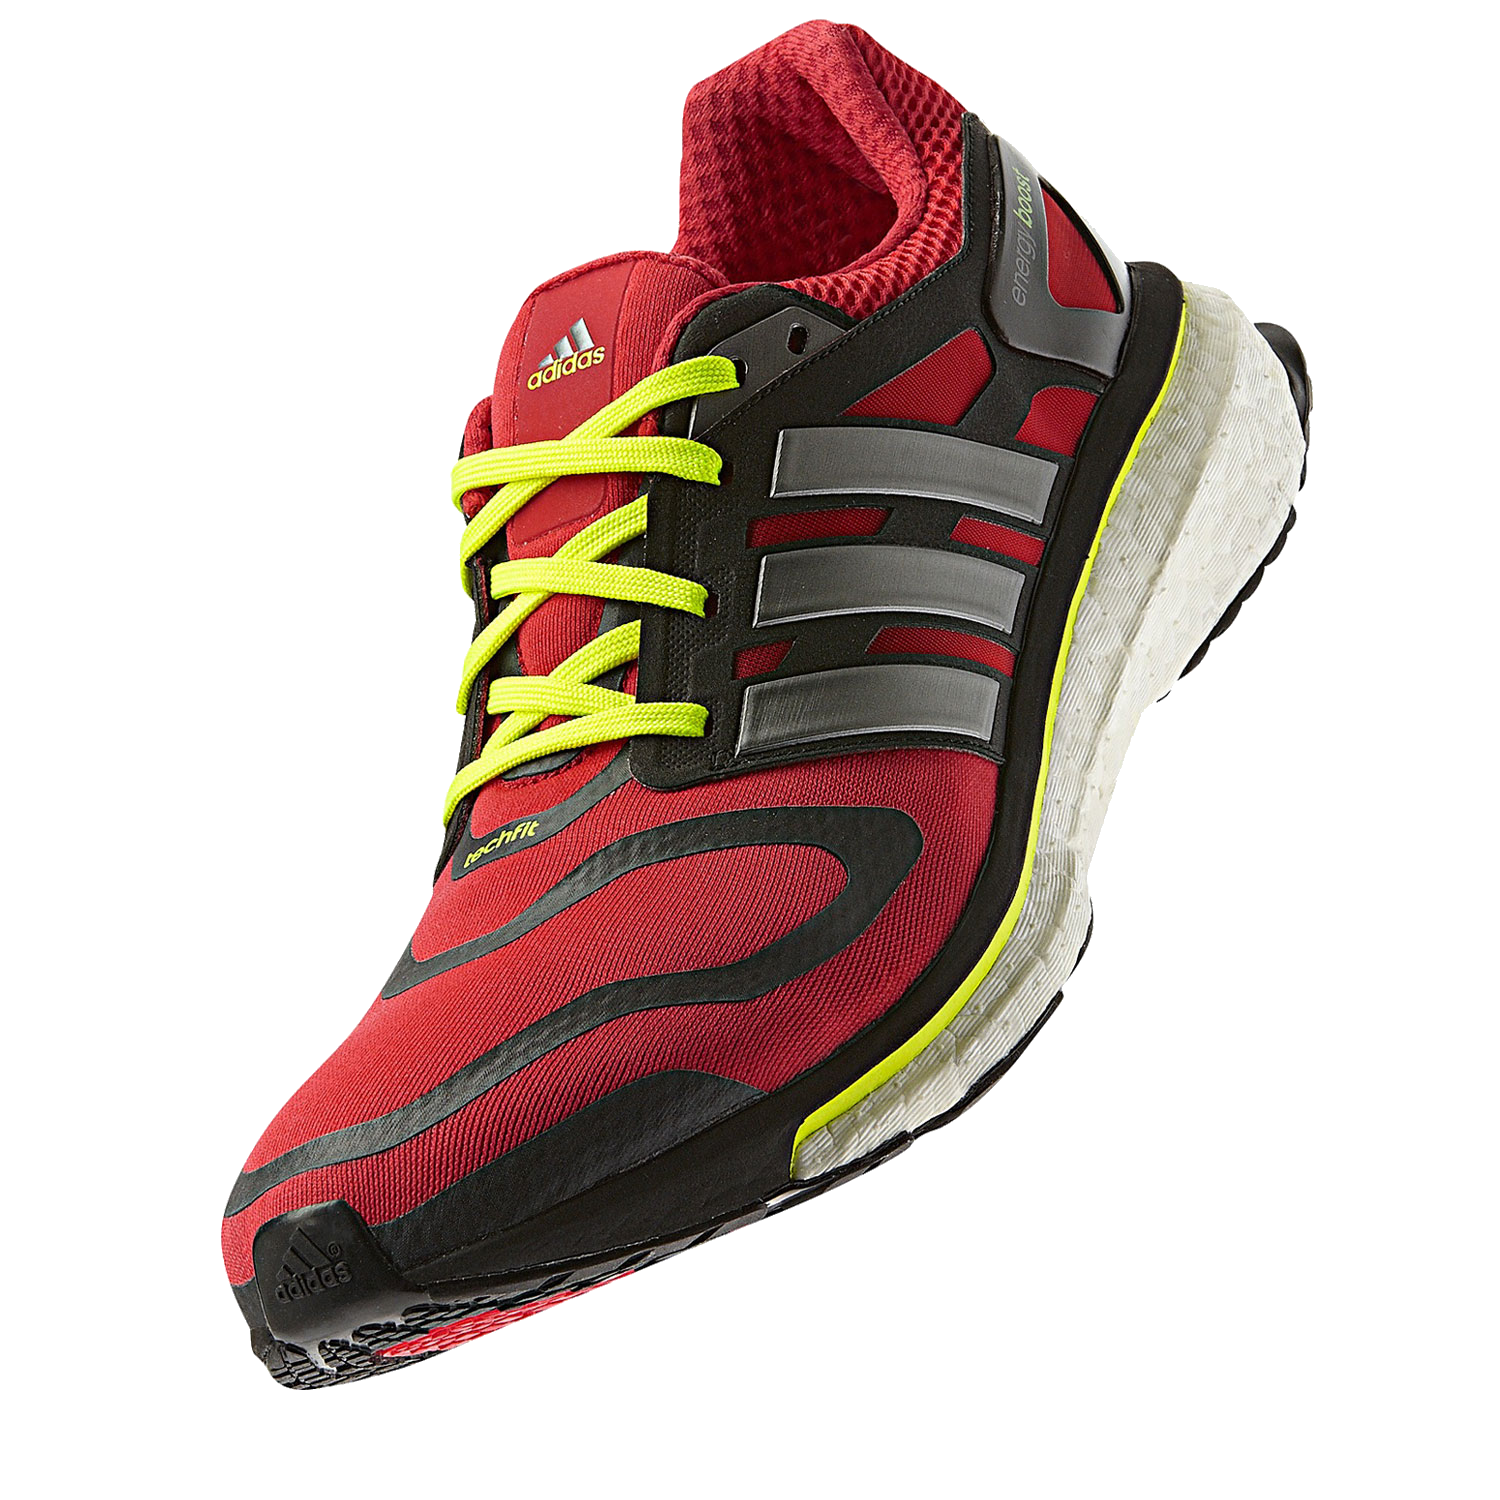 New revolutionary running shoes with cutting-edge technology now available from mediakits.theygsgroup.com